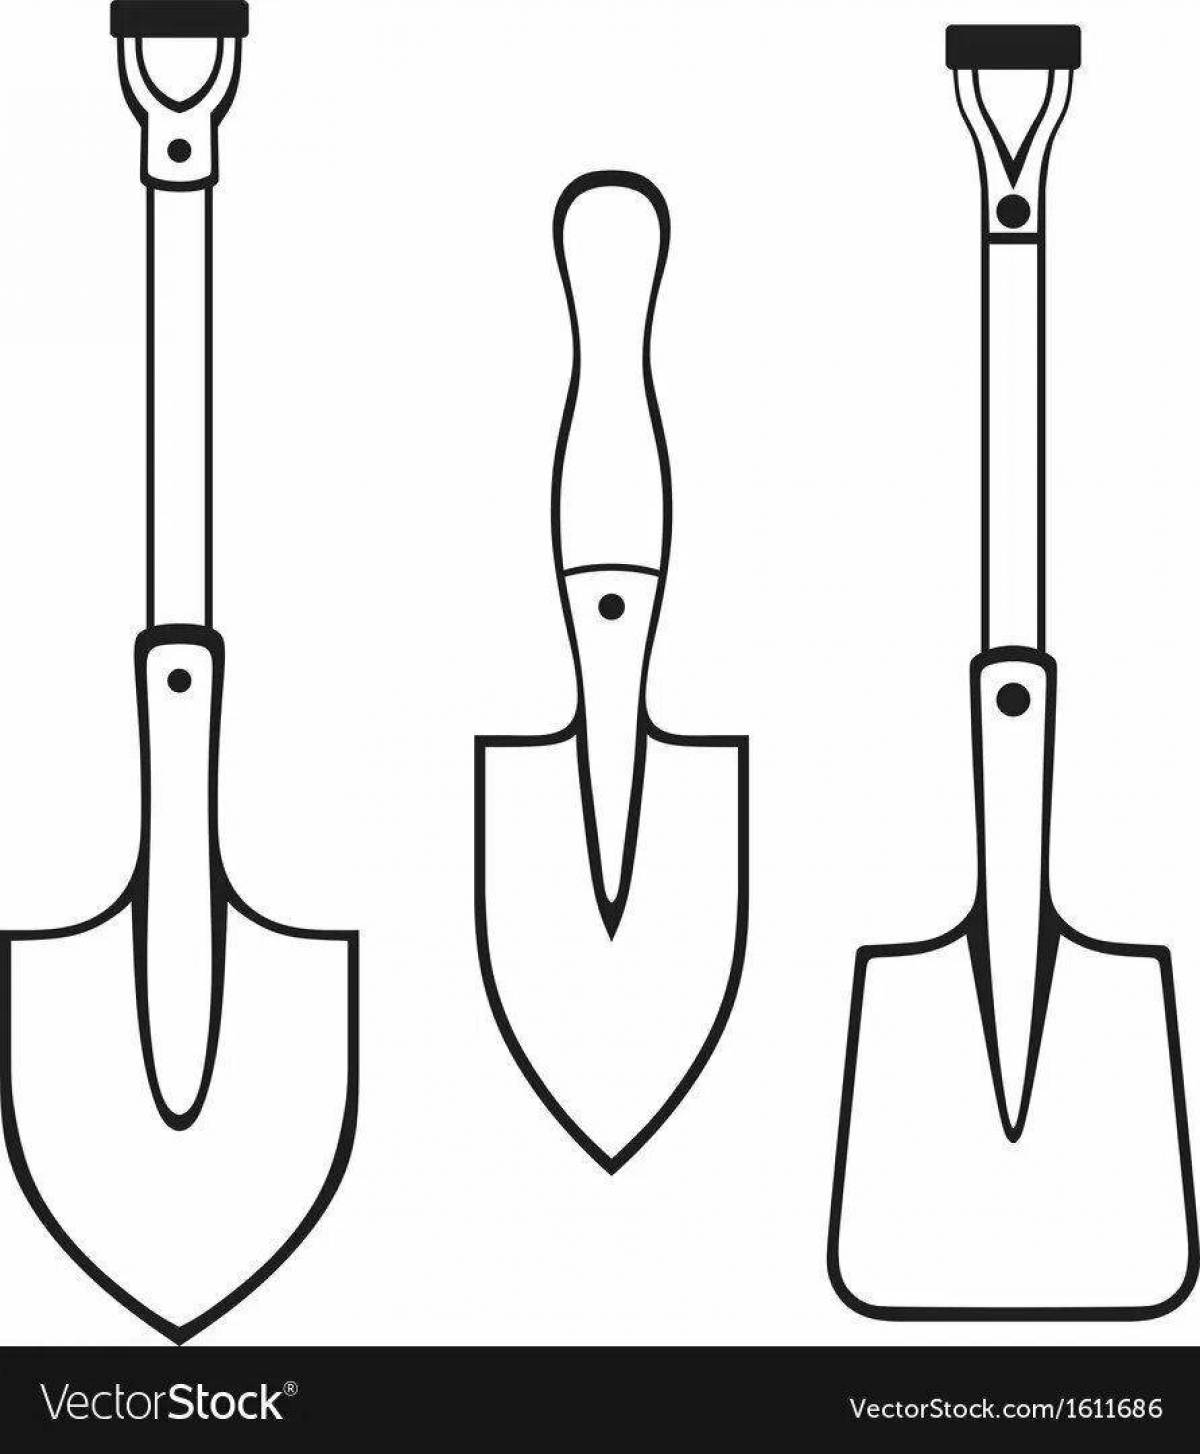 Exquisite spatula coloring page